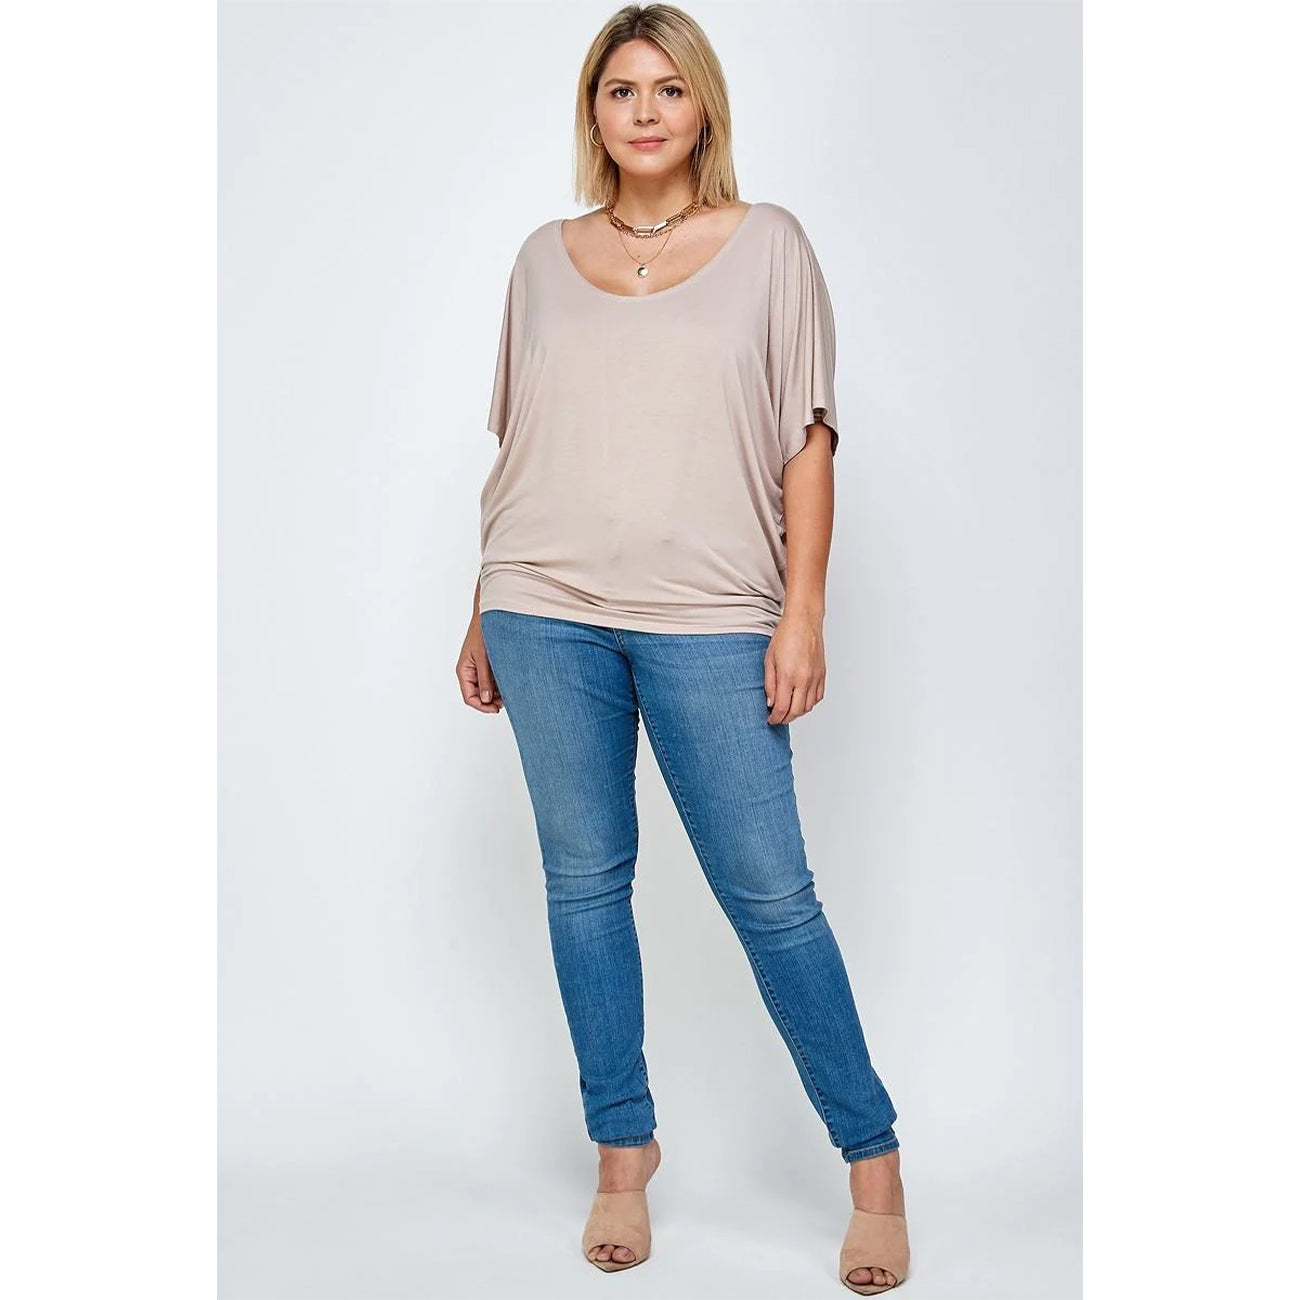 Solid Knit Women's Top With A Flowy Silhouette